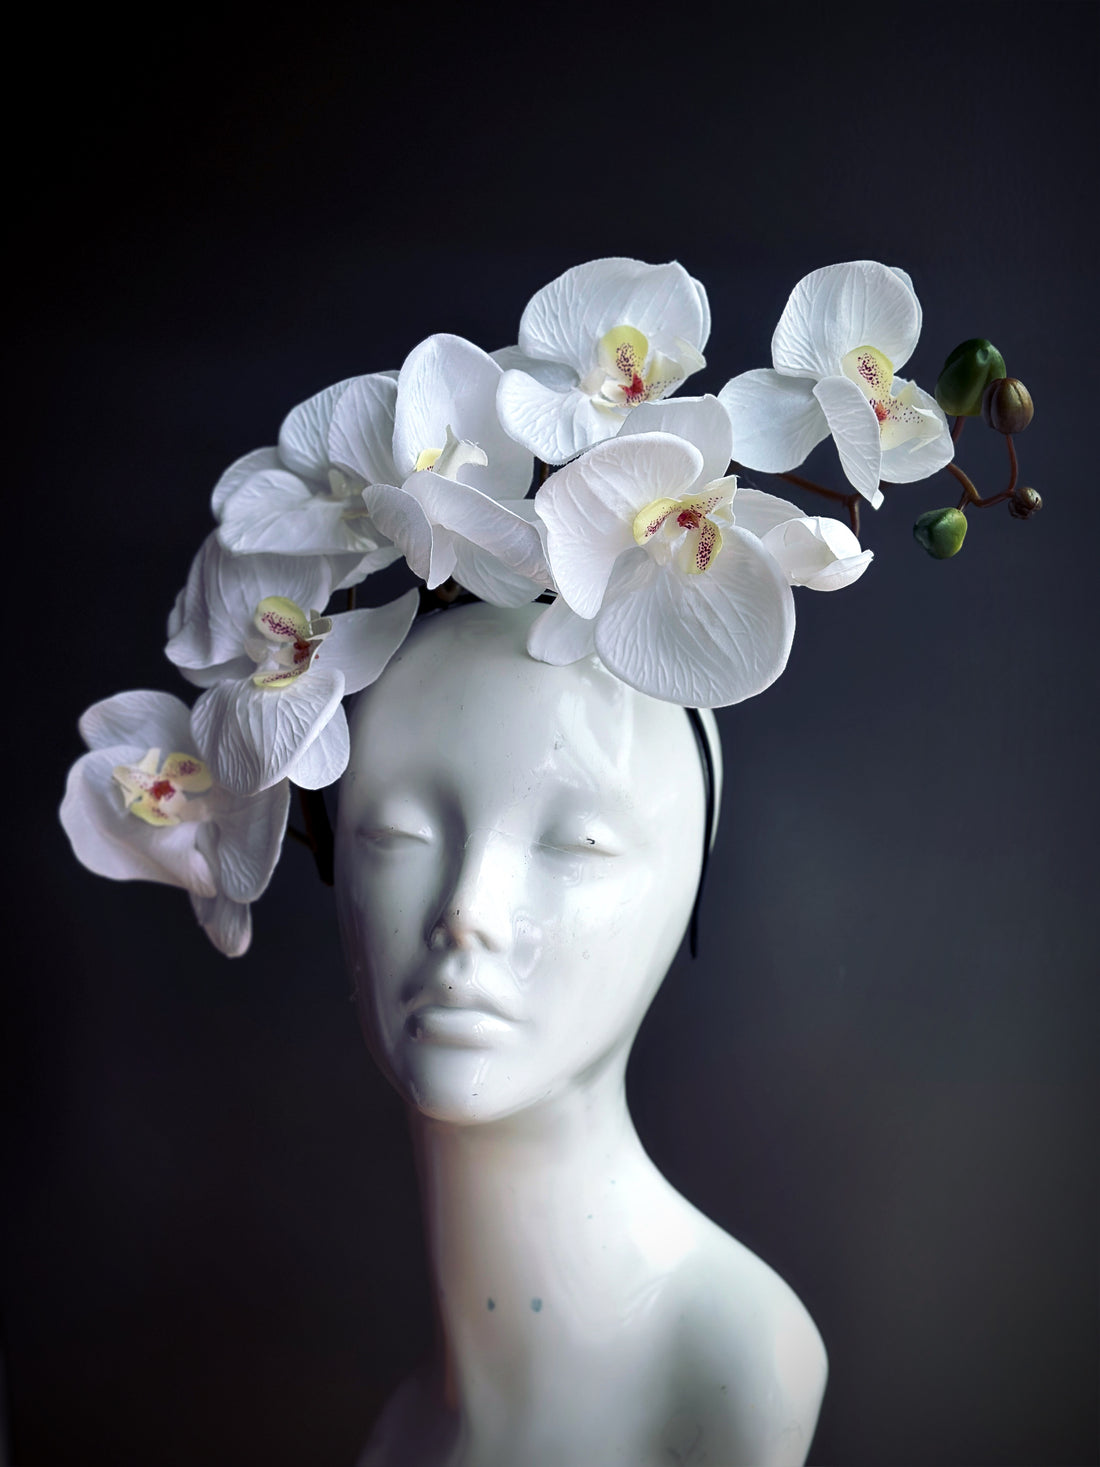 White orchid flowers on a black fascinator headband.